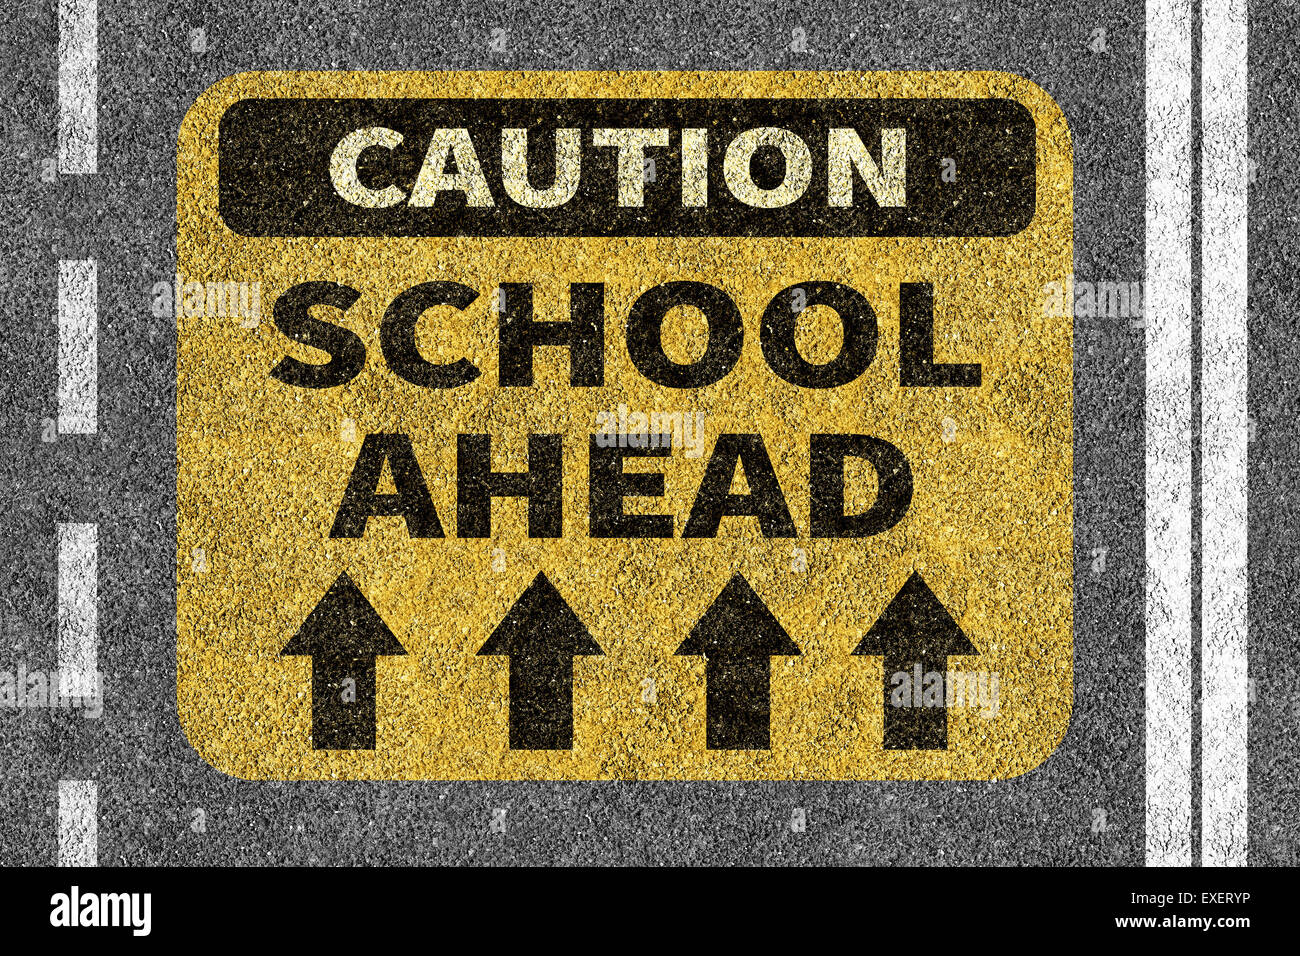 Road with School ahead caution sign Stock Photo